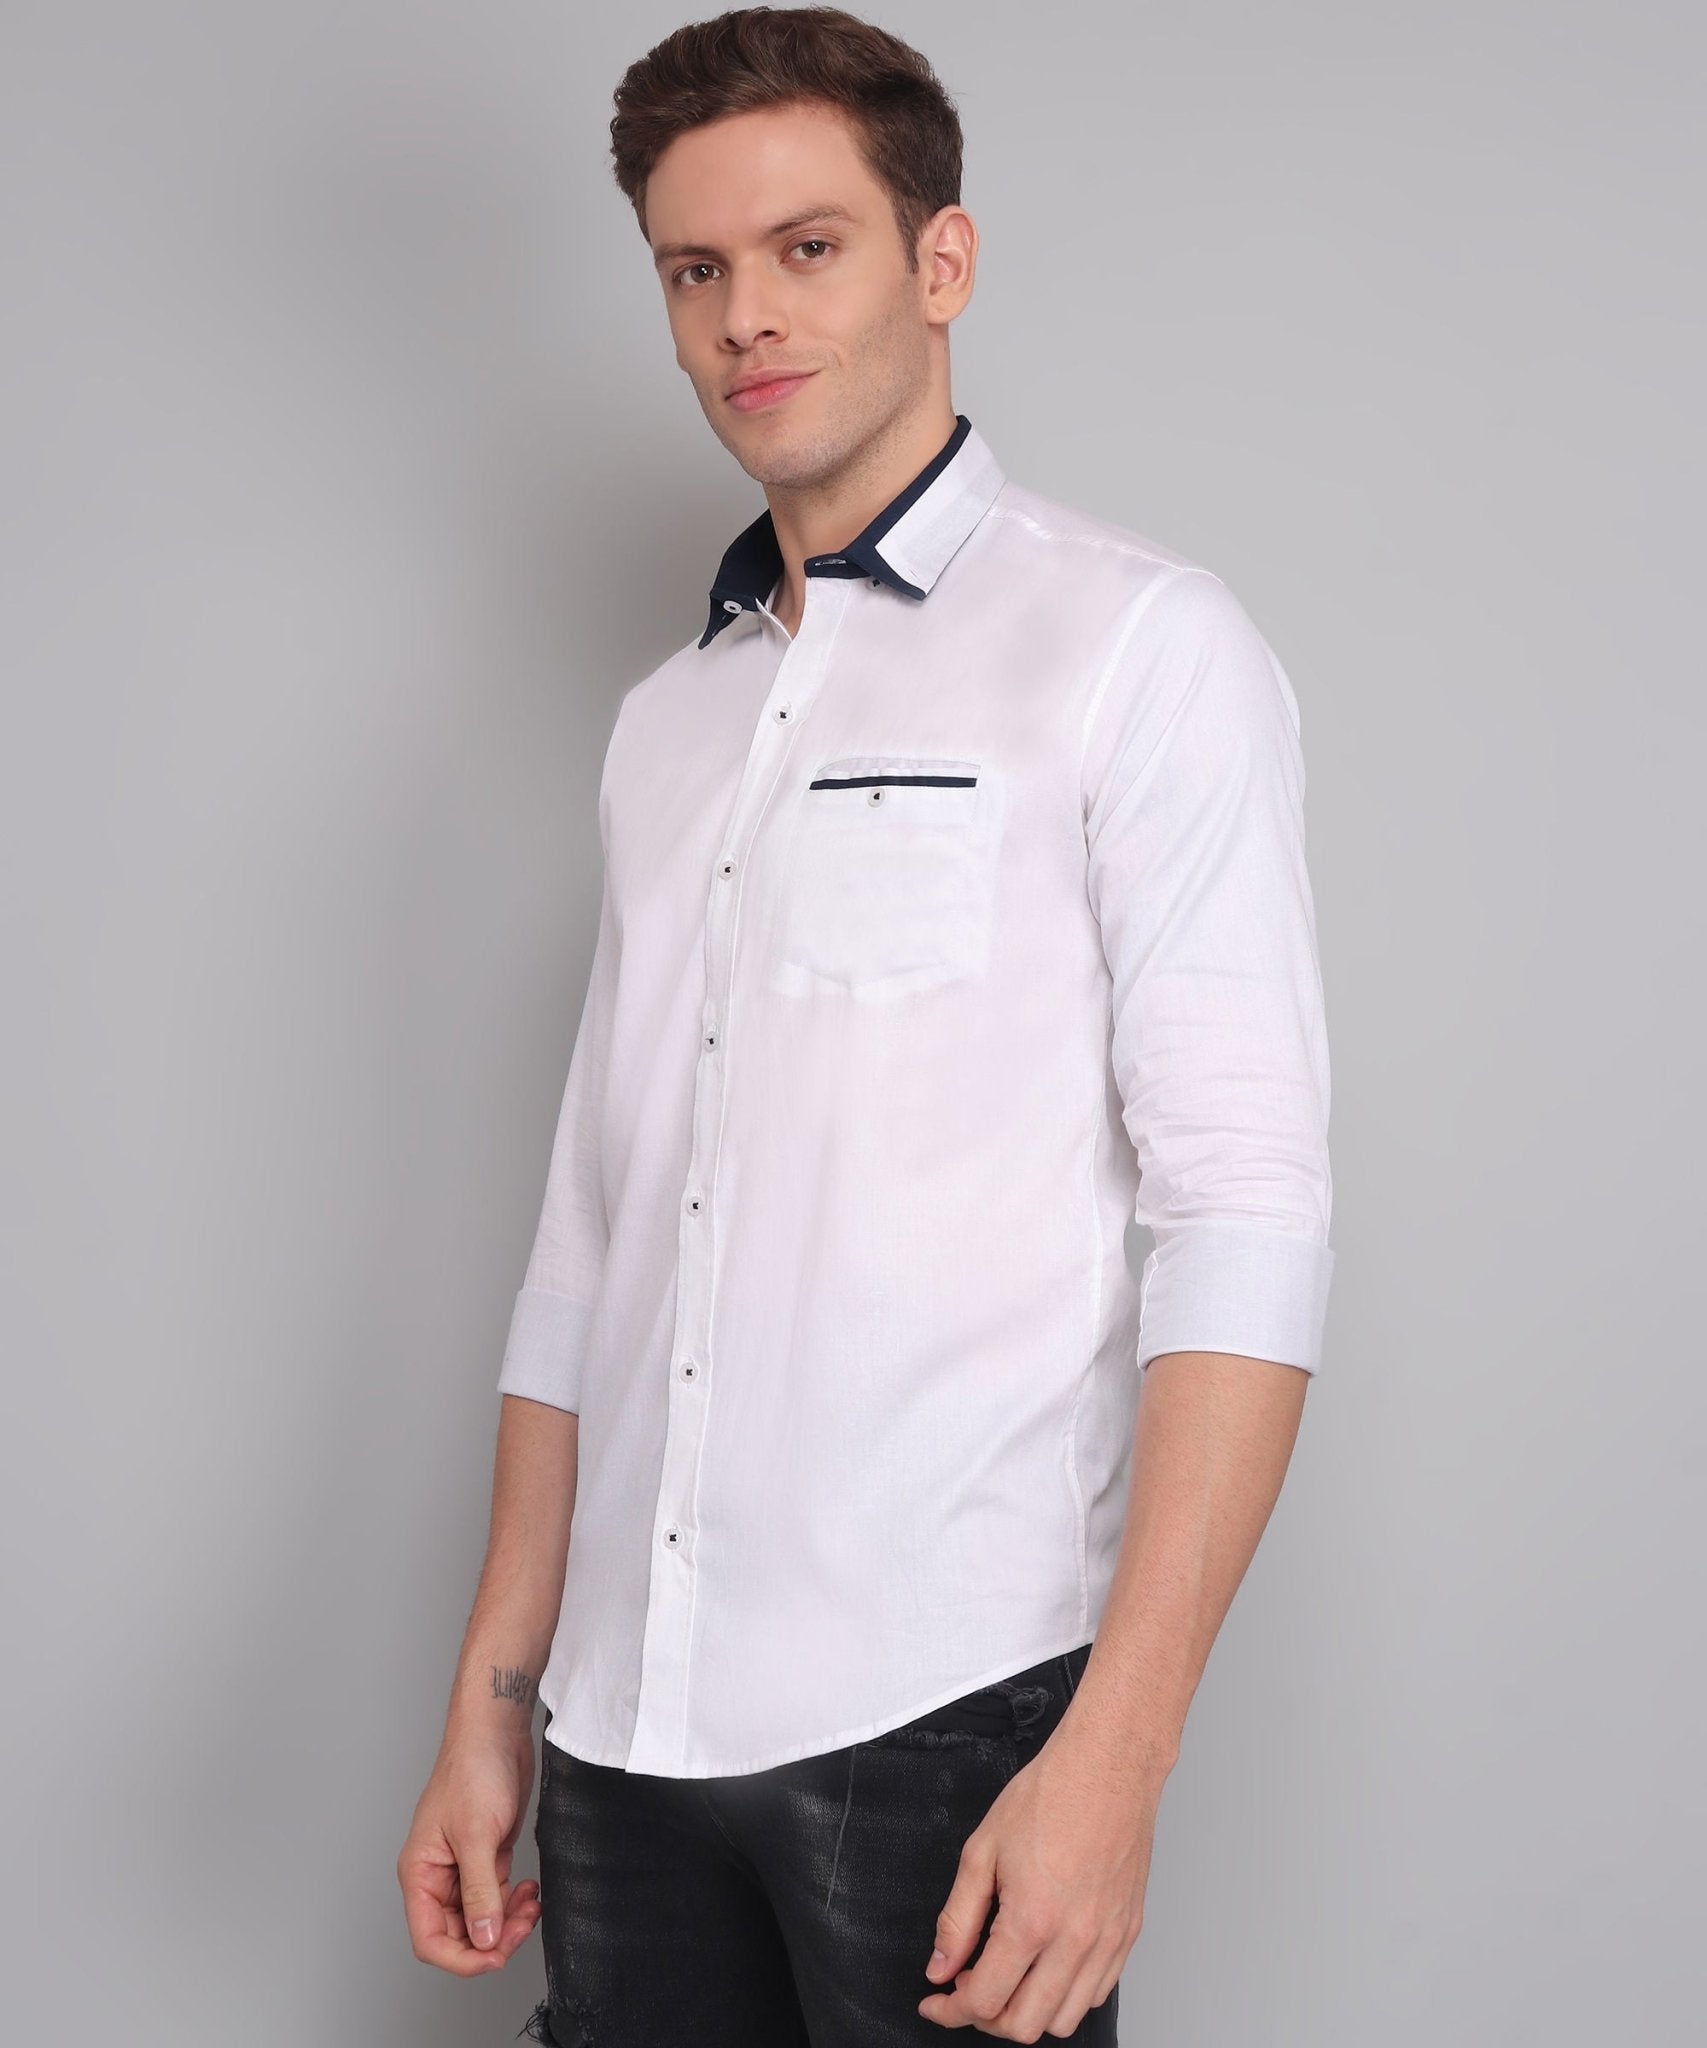 TryBuy Premium Fashionable Cotton Casual White Shirt for Men - TryBuy® USA🇺🇸